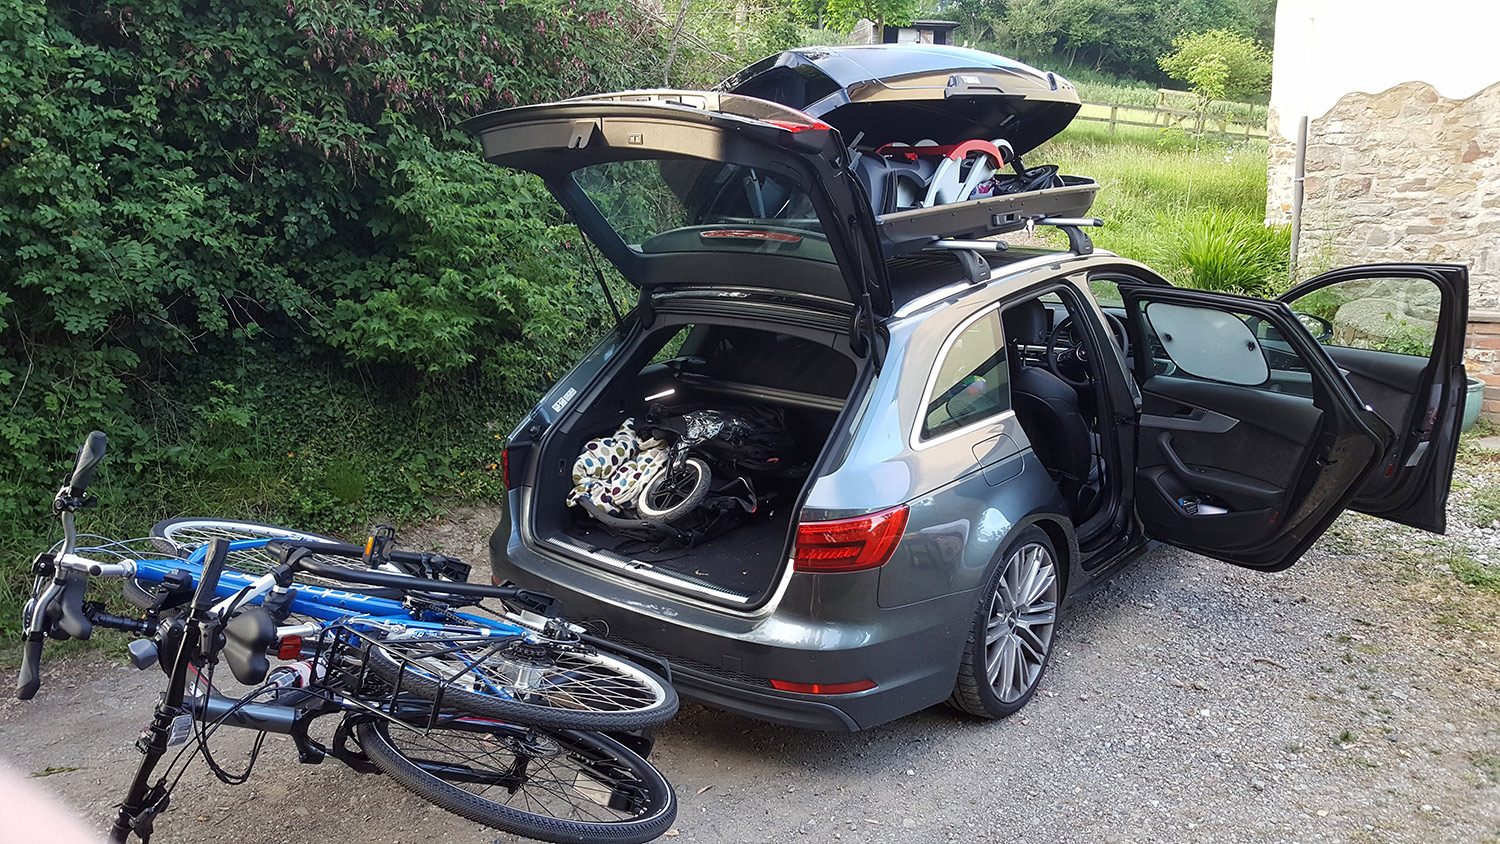 Audi A4 Avant quattro long-term review: summer holiday practicality, space, driving impressions